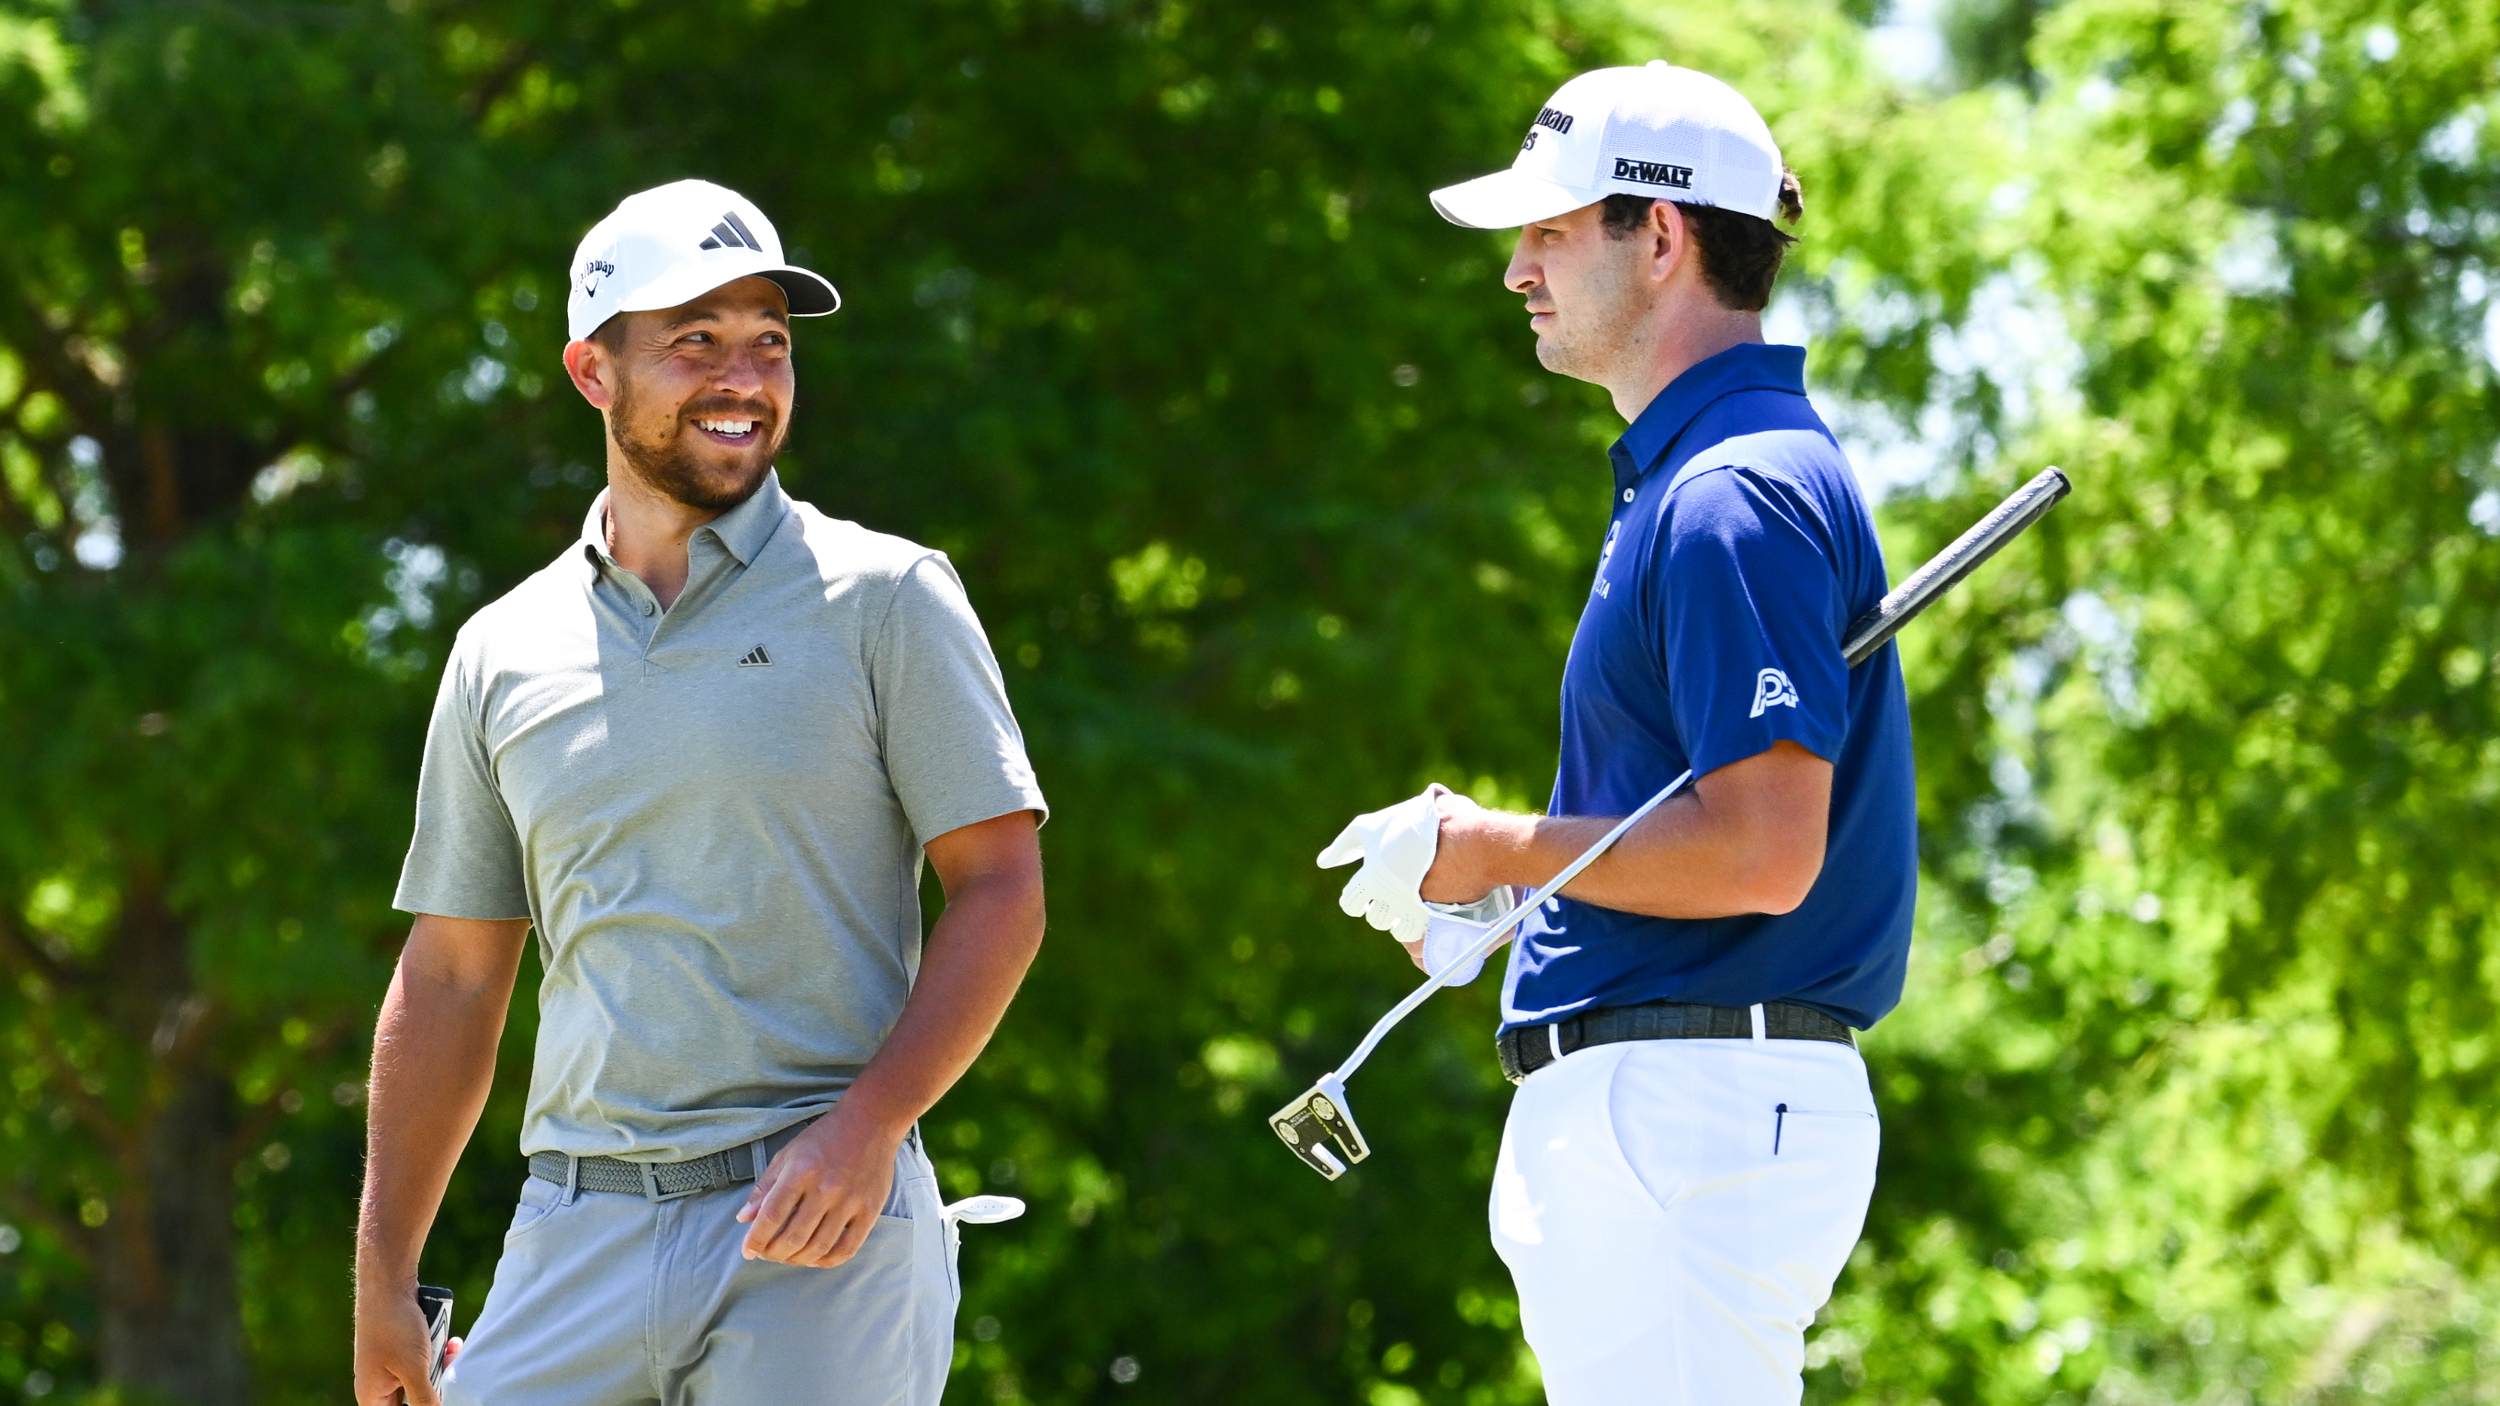 Xander Schauffele and Patrick Cantlay at the Zurich Classic of New Orleans